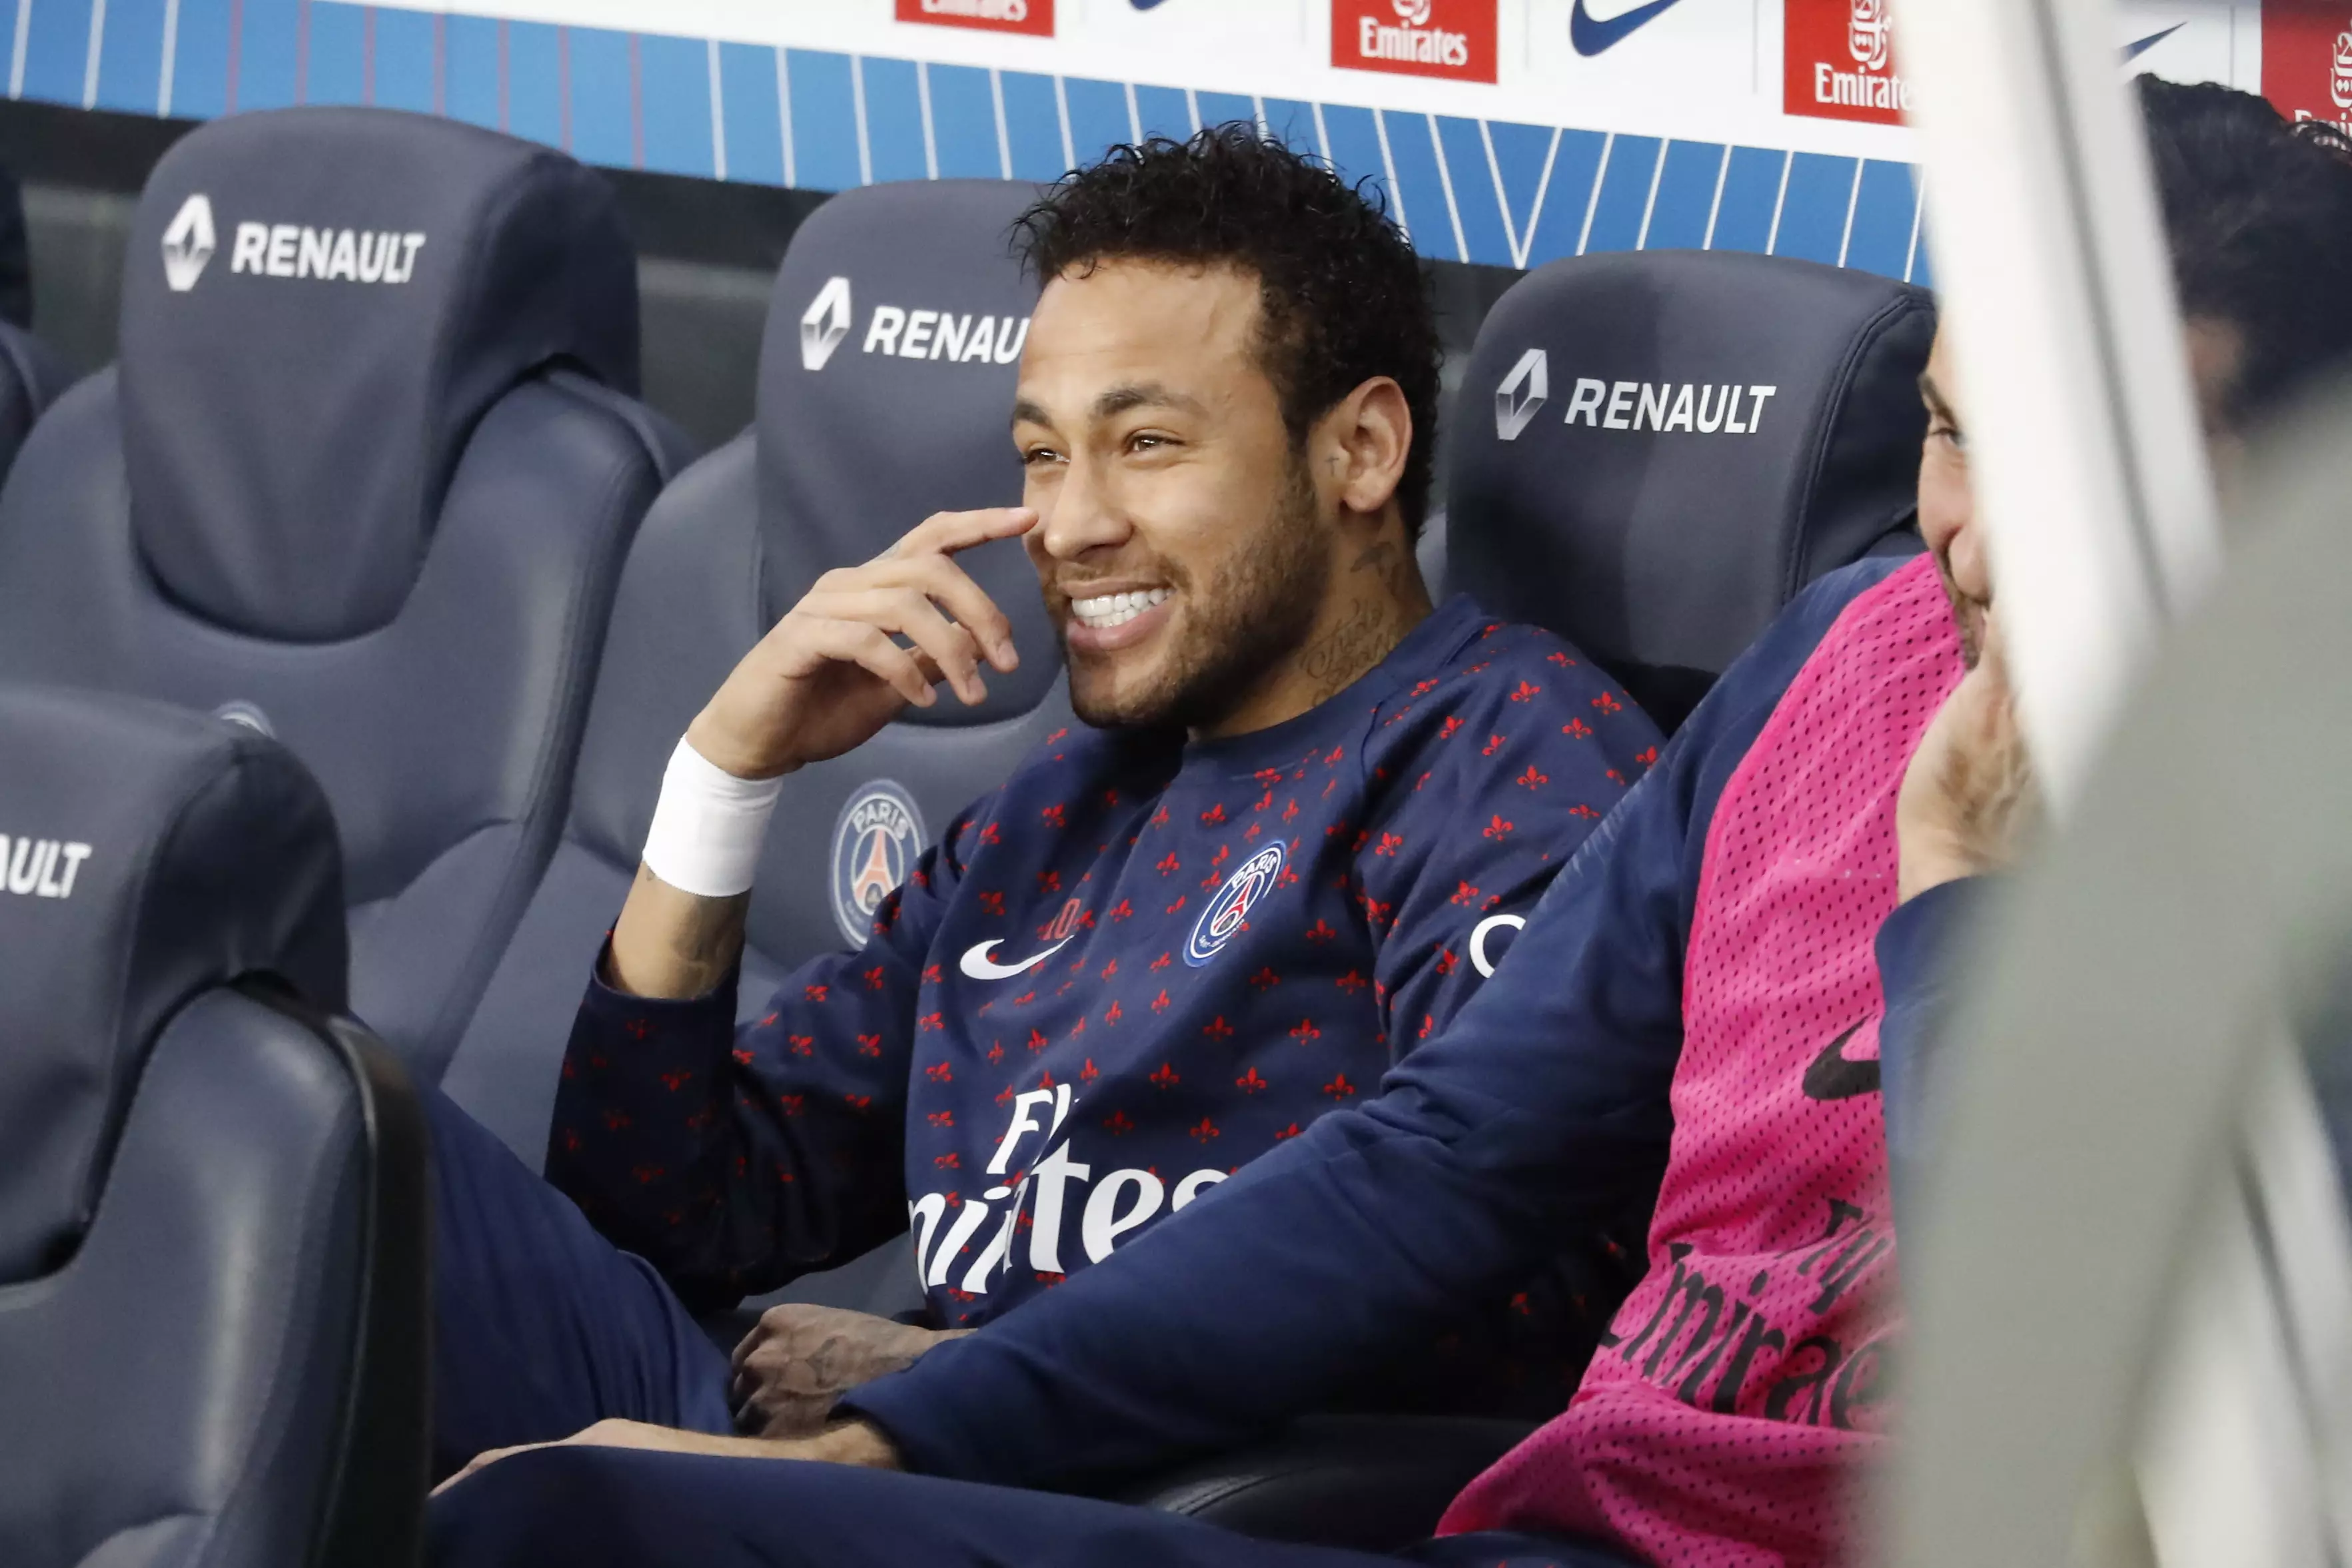 Neymar reacts to the news he's going back to Barcelona. Image: PA Images